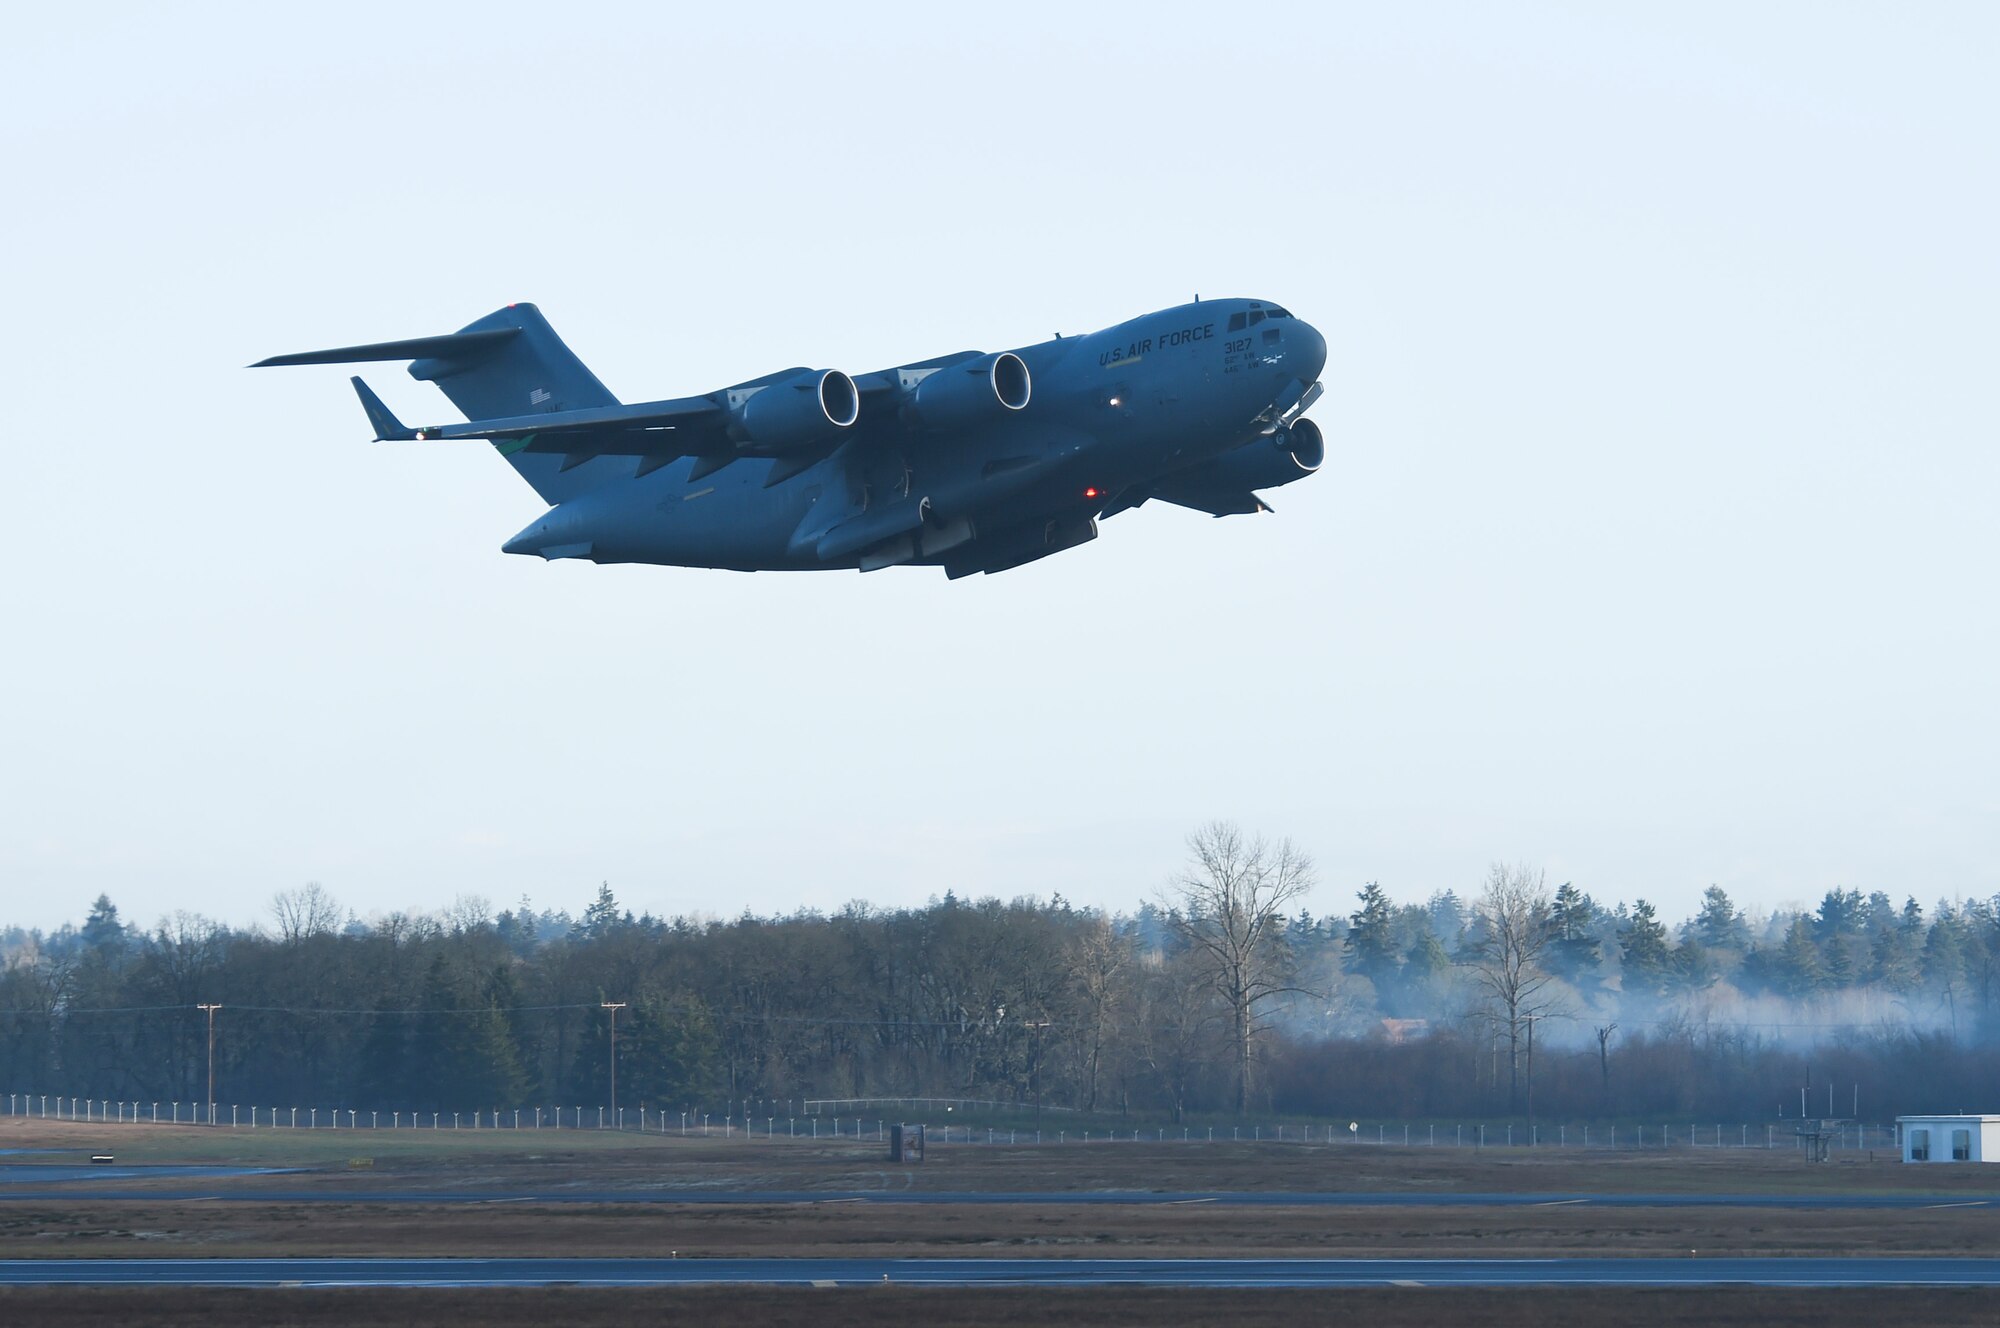 A 62nd Airlift Wing C-17 Globemaster III takes off from Joint Base Lewis-McChord, Wash., Dec. 22, 2020, following the construction of a new concrete arch bridge under the runway. The Seattle District Corps of Engineer led the construction effort, which reopened the runway’s full 10,000-foot operational length. (U.S. Air Force photo by Master Sgt. Julius Delos Reyes)